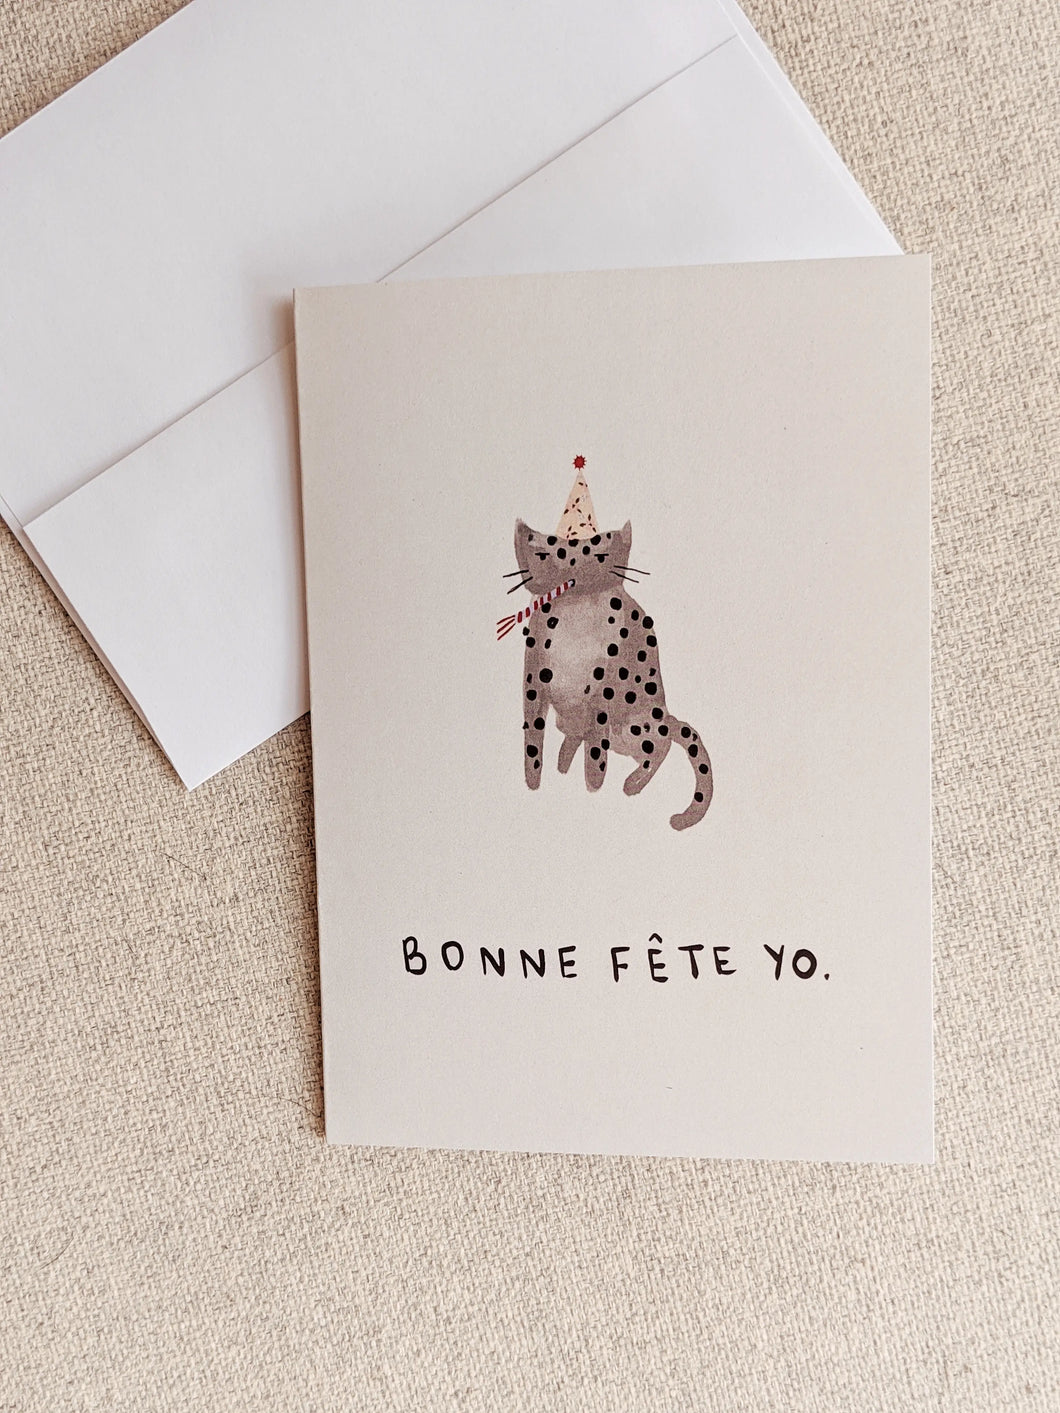 illustration of a cat with polka dots wearing a party hat and blowing a paper horn text bonne fete you